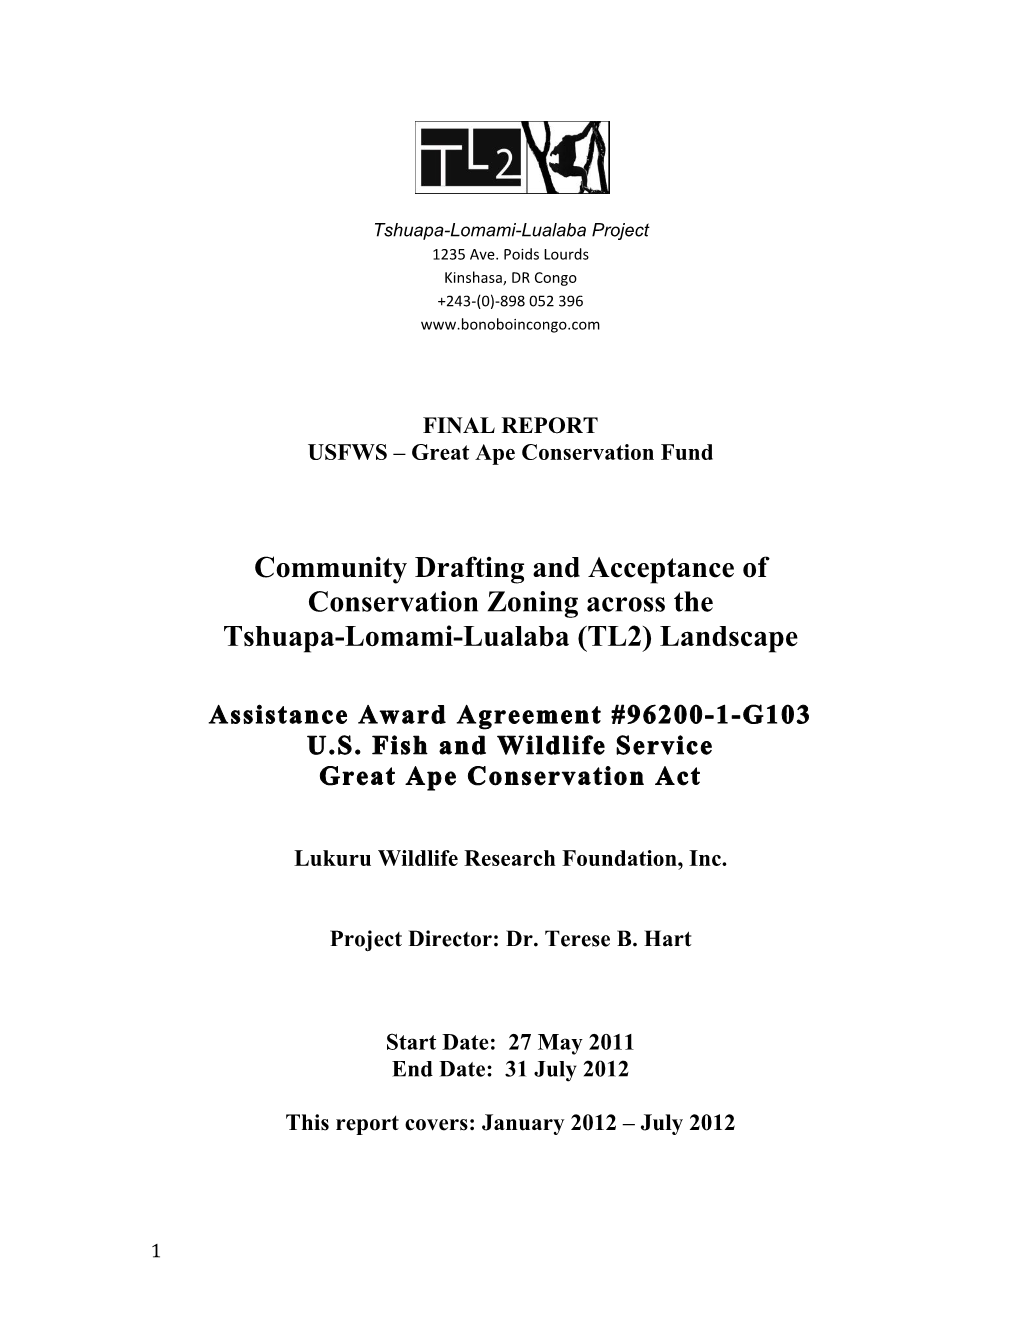 Community Drafting and Acceptance of Conservation Zoning Across the Tshuapa-Lomami-Lualaba (TL2) Landscape